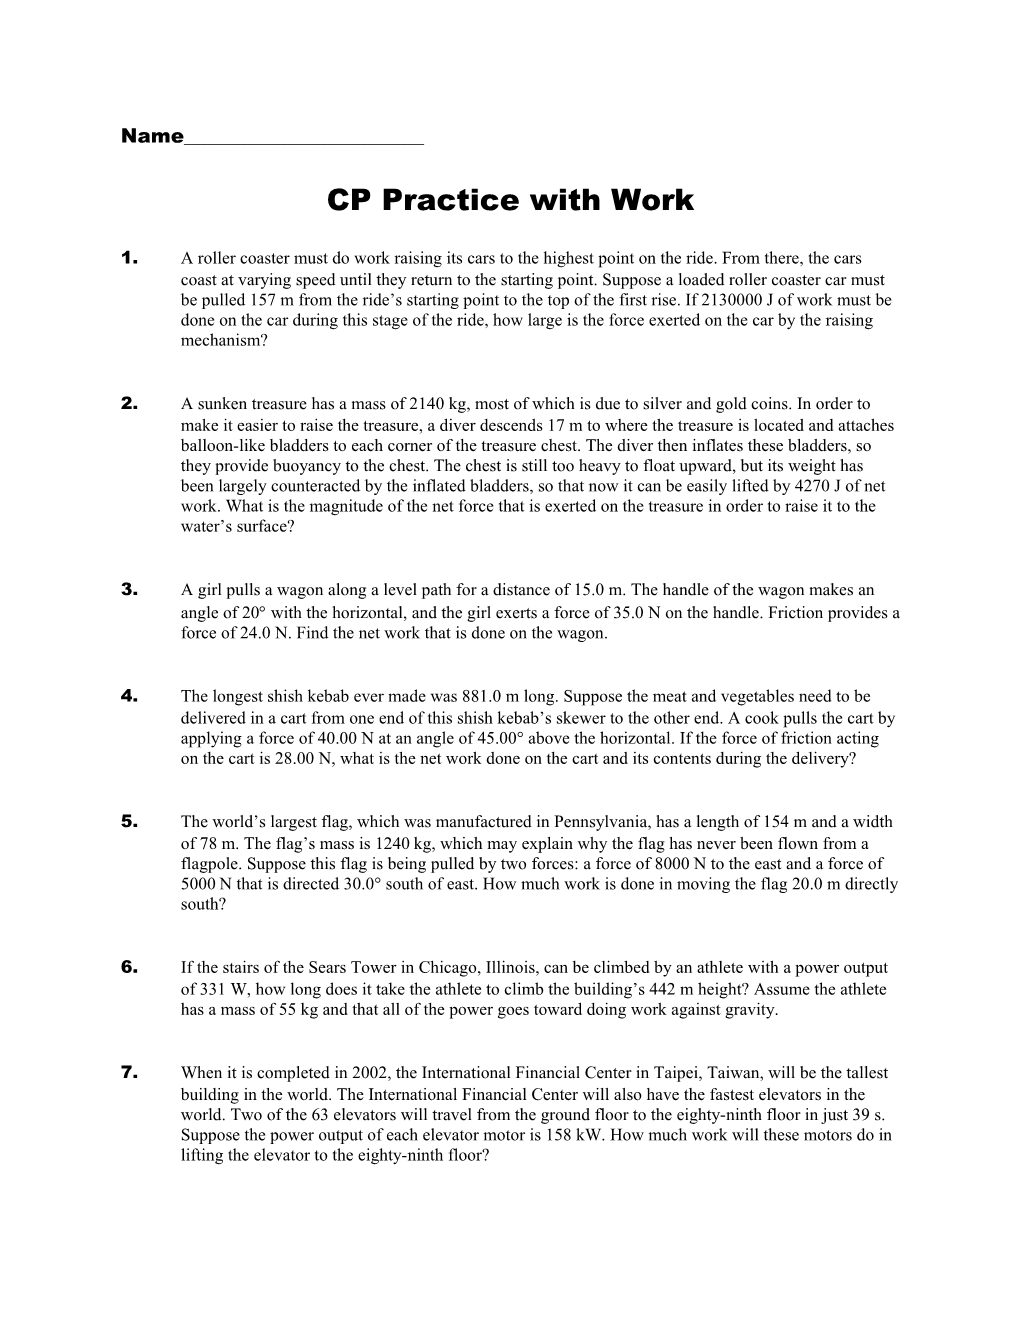 CP Practice with Work